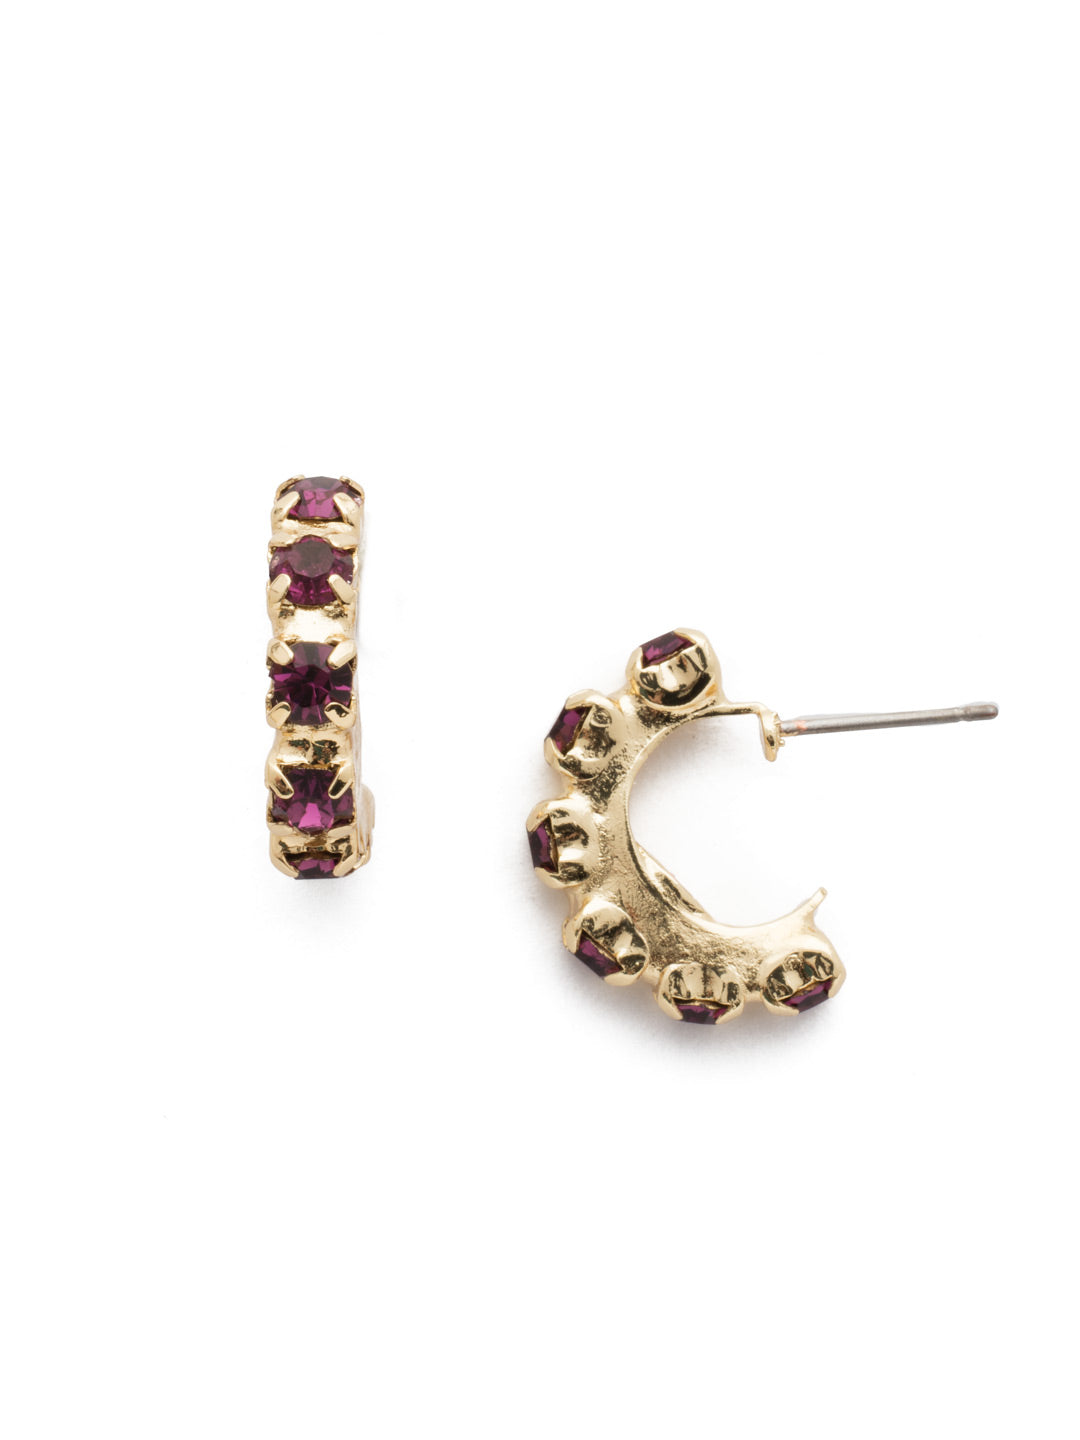 Maisie Hoop Earring - EEF49BGAM - <p>These eye-catching diamond encrusted hoops are sure to elevate any look. Pair these hoops with a blazer or a party dress to effortlessly complement any look. From Sorrelli's Amethyst collection in our Bright Gold-tone finish.</p>